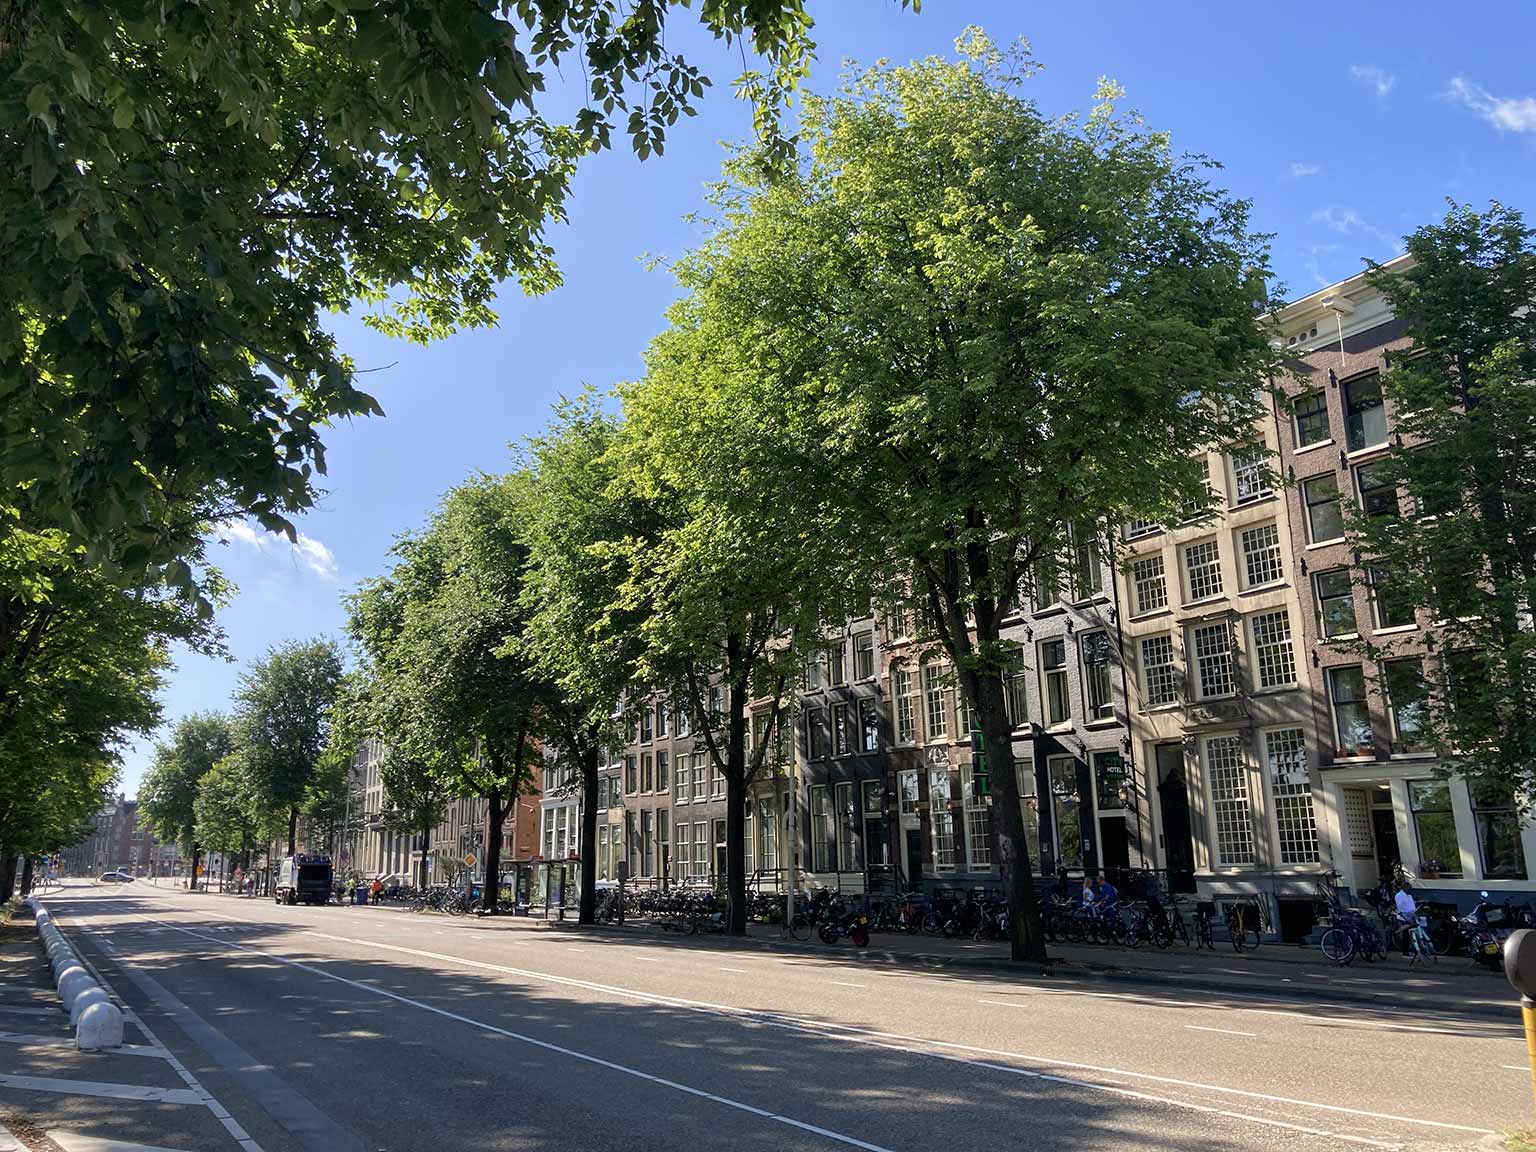 Prins Hendrikkade, Amsterdam, seen from number 128 in southeastern direction